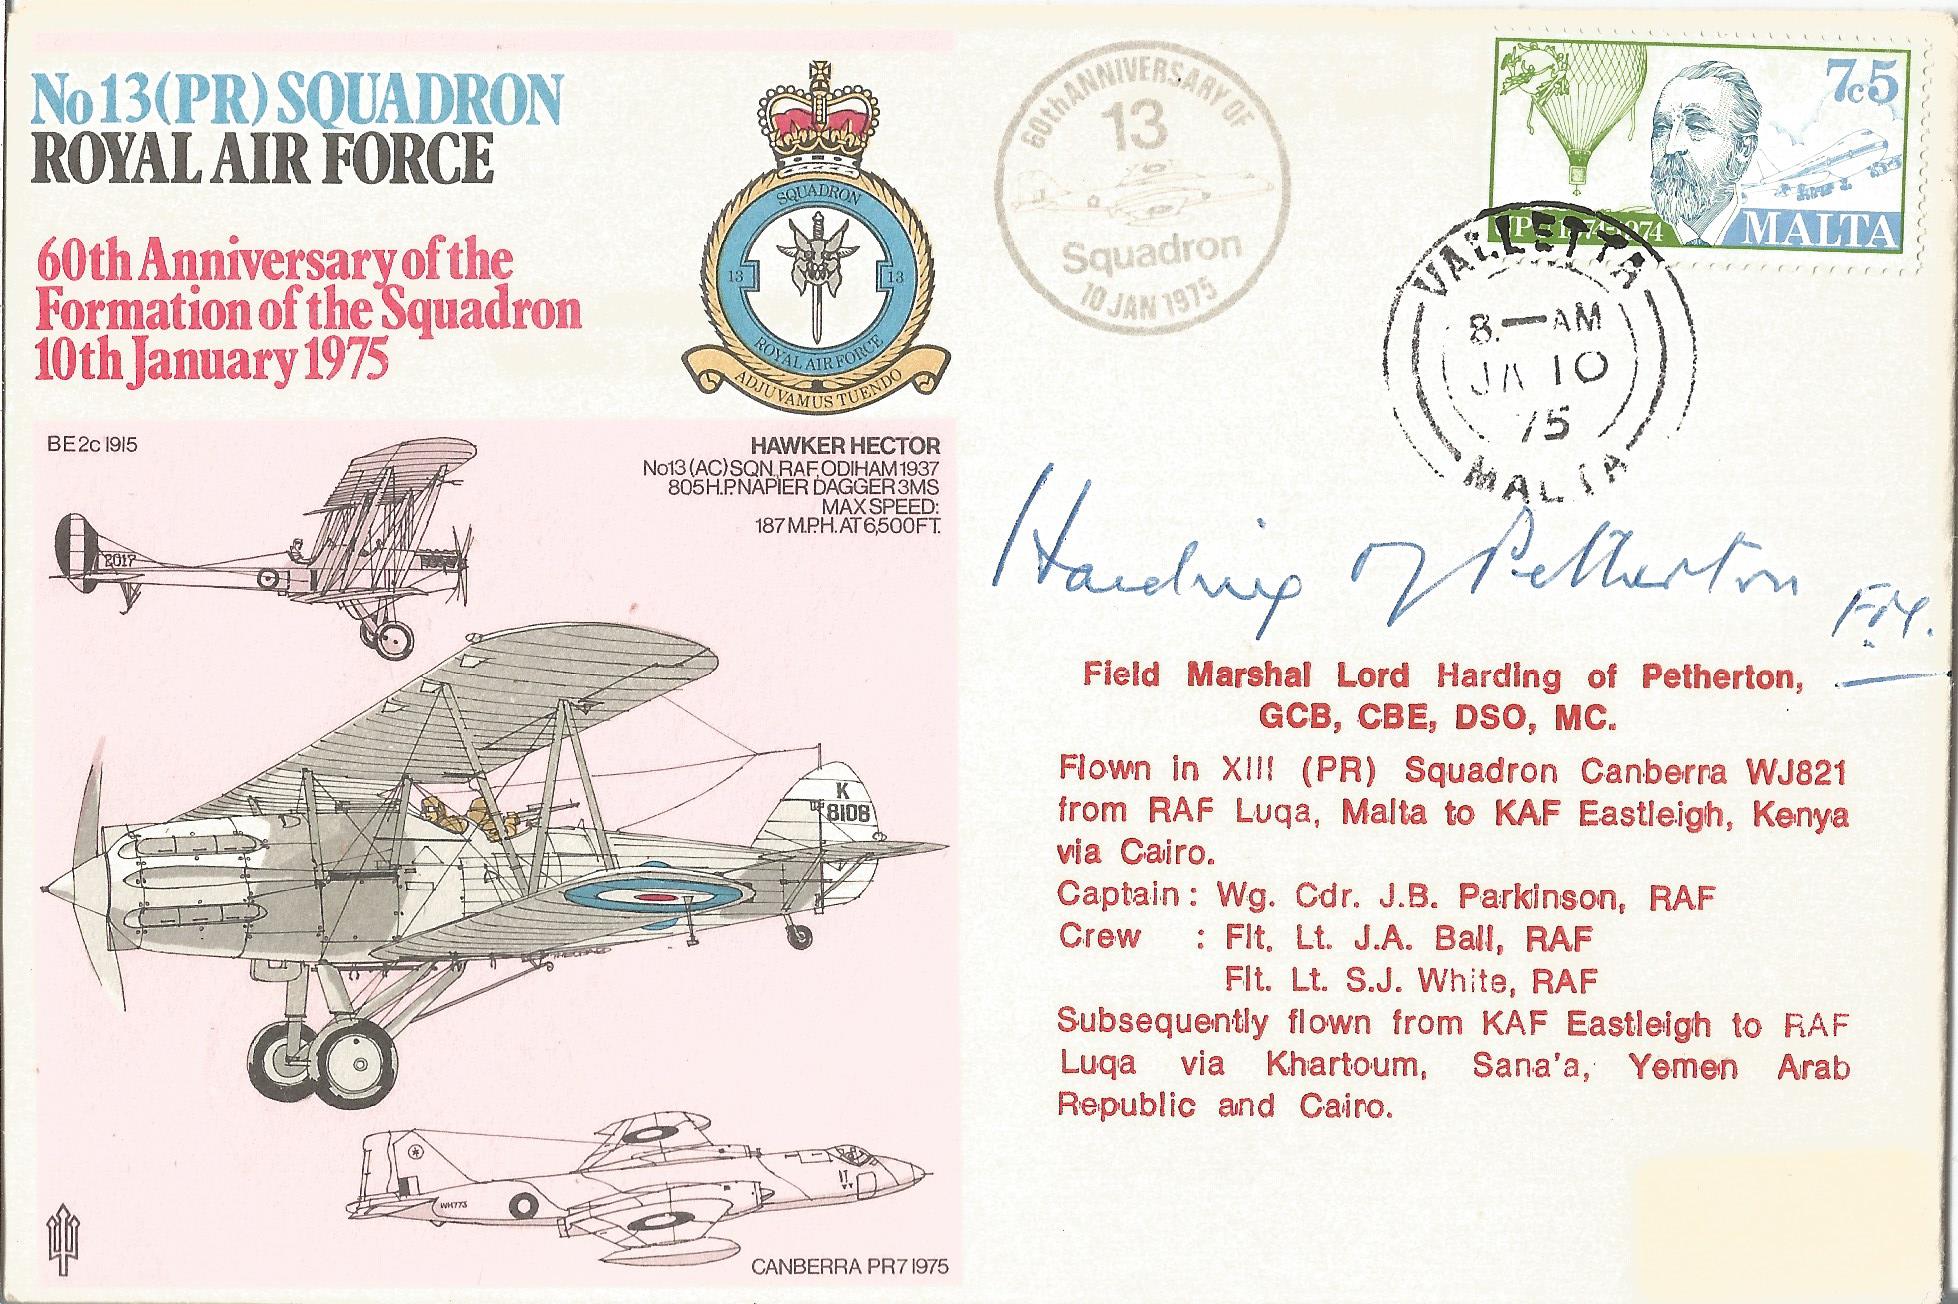 RAF flown cover No. 13 (PR) Squadron Royal Air Force – 60th Anniversary of the Formation of the